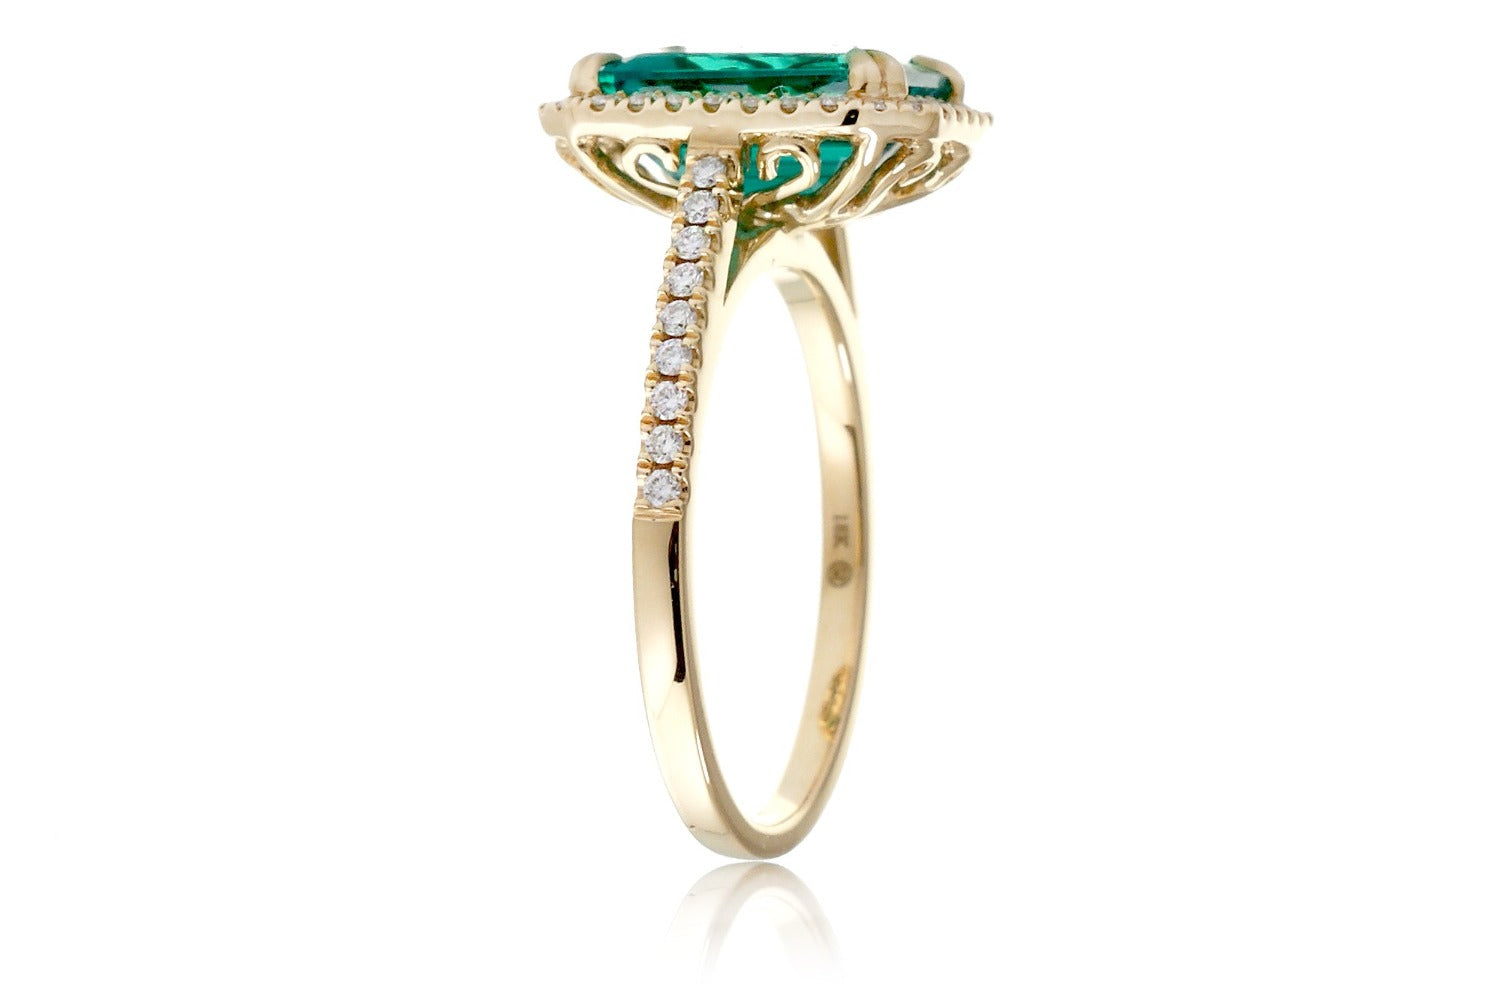 Emerald Cut Emerald With Diamond Halo Engagement Ring In Yellow Gold Cathedral Setting